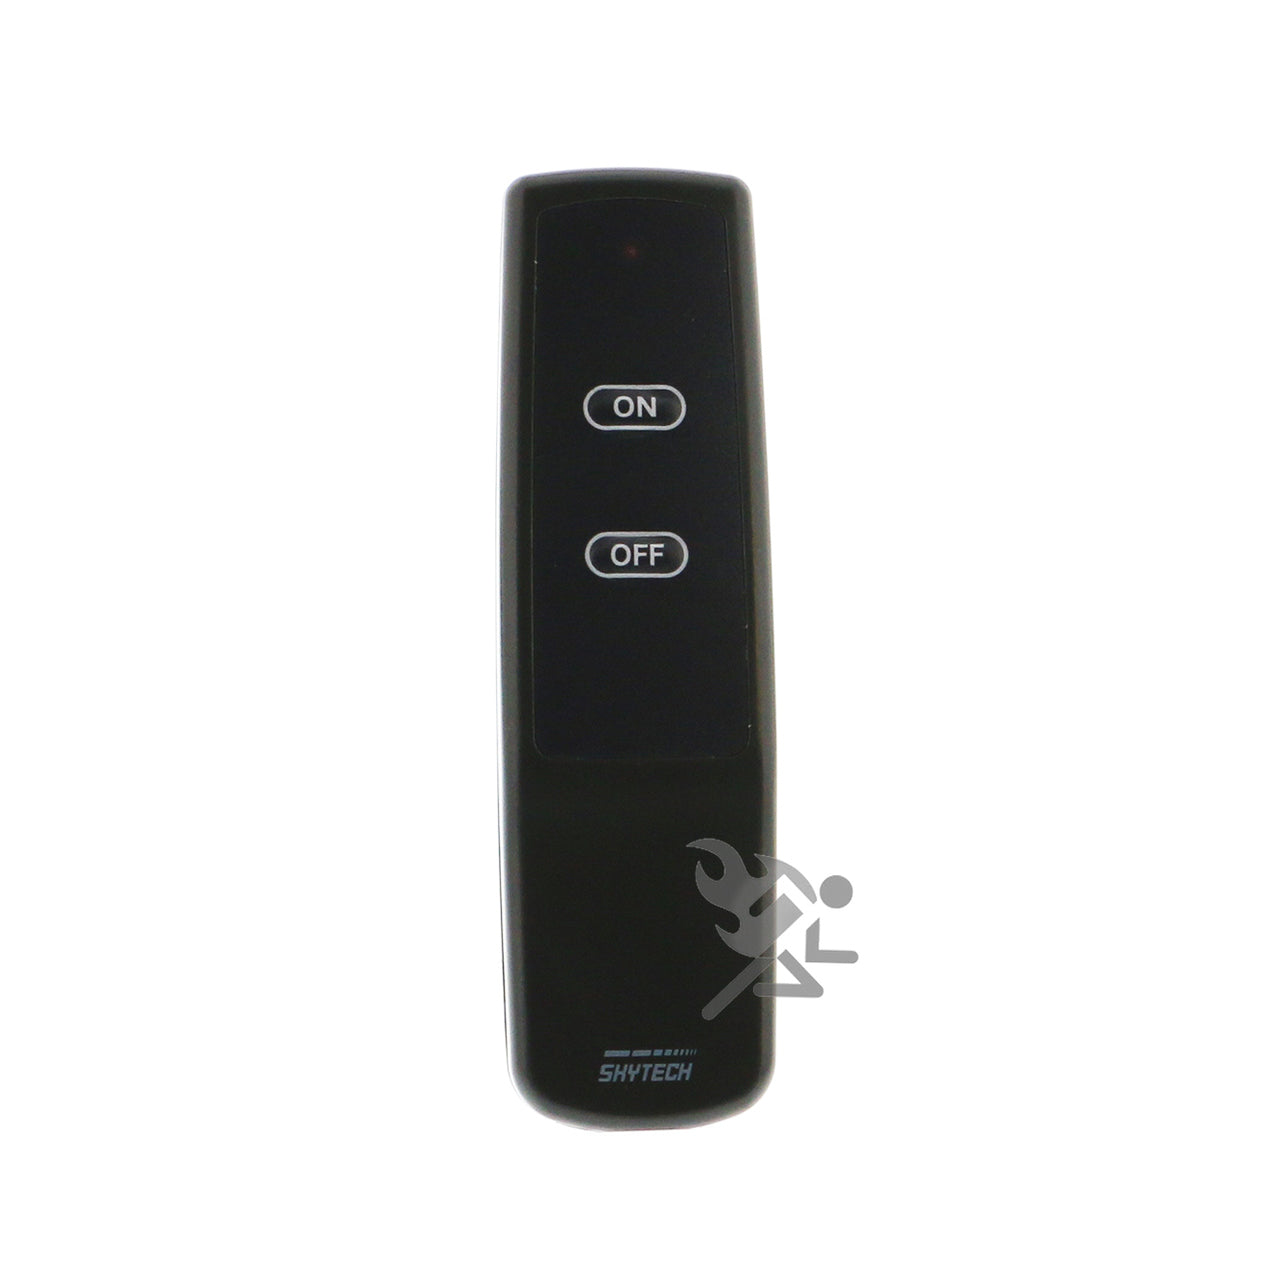 Skytech CON Battery Operated Fireplace Remote Control for Latching Solenoid